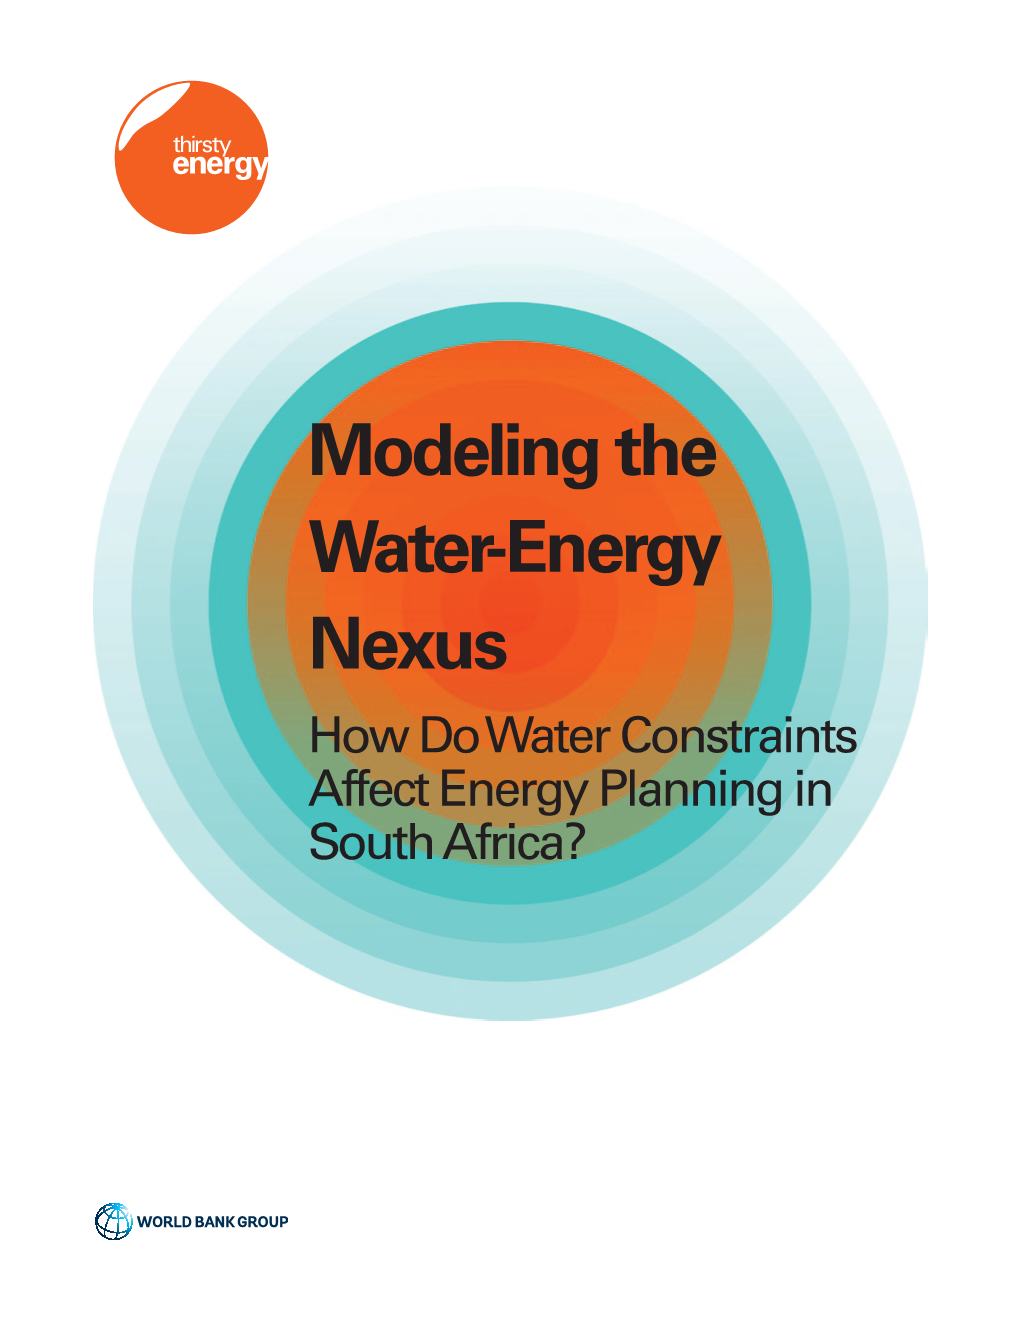 Modeling the Water-Energy Nexus: How Do Water Constraints Affect Energy Planning in South Africa?